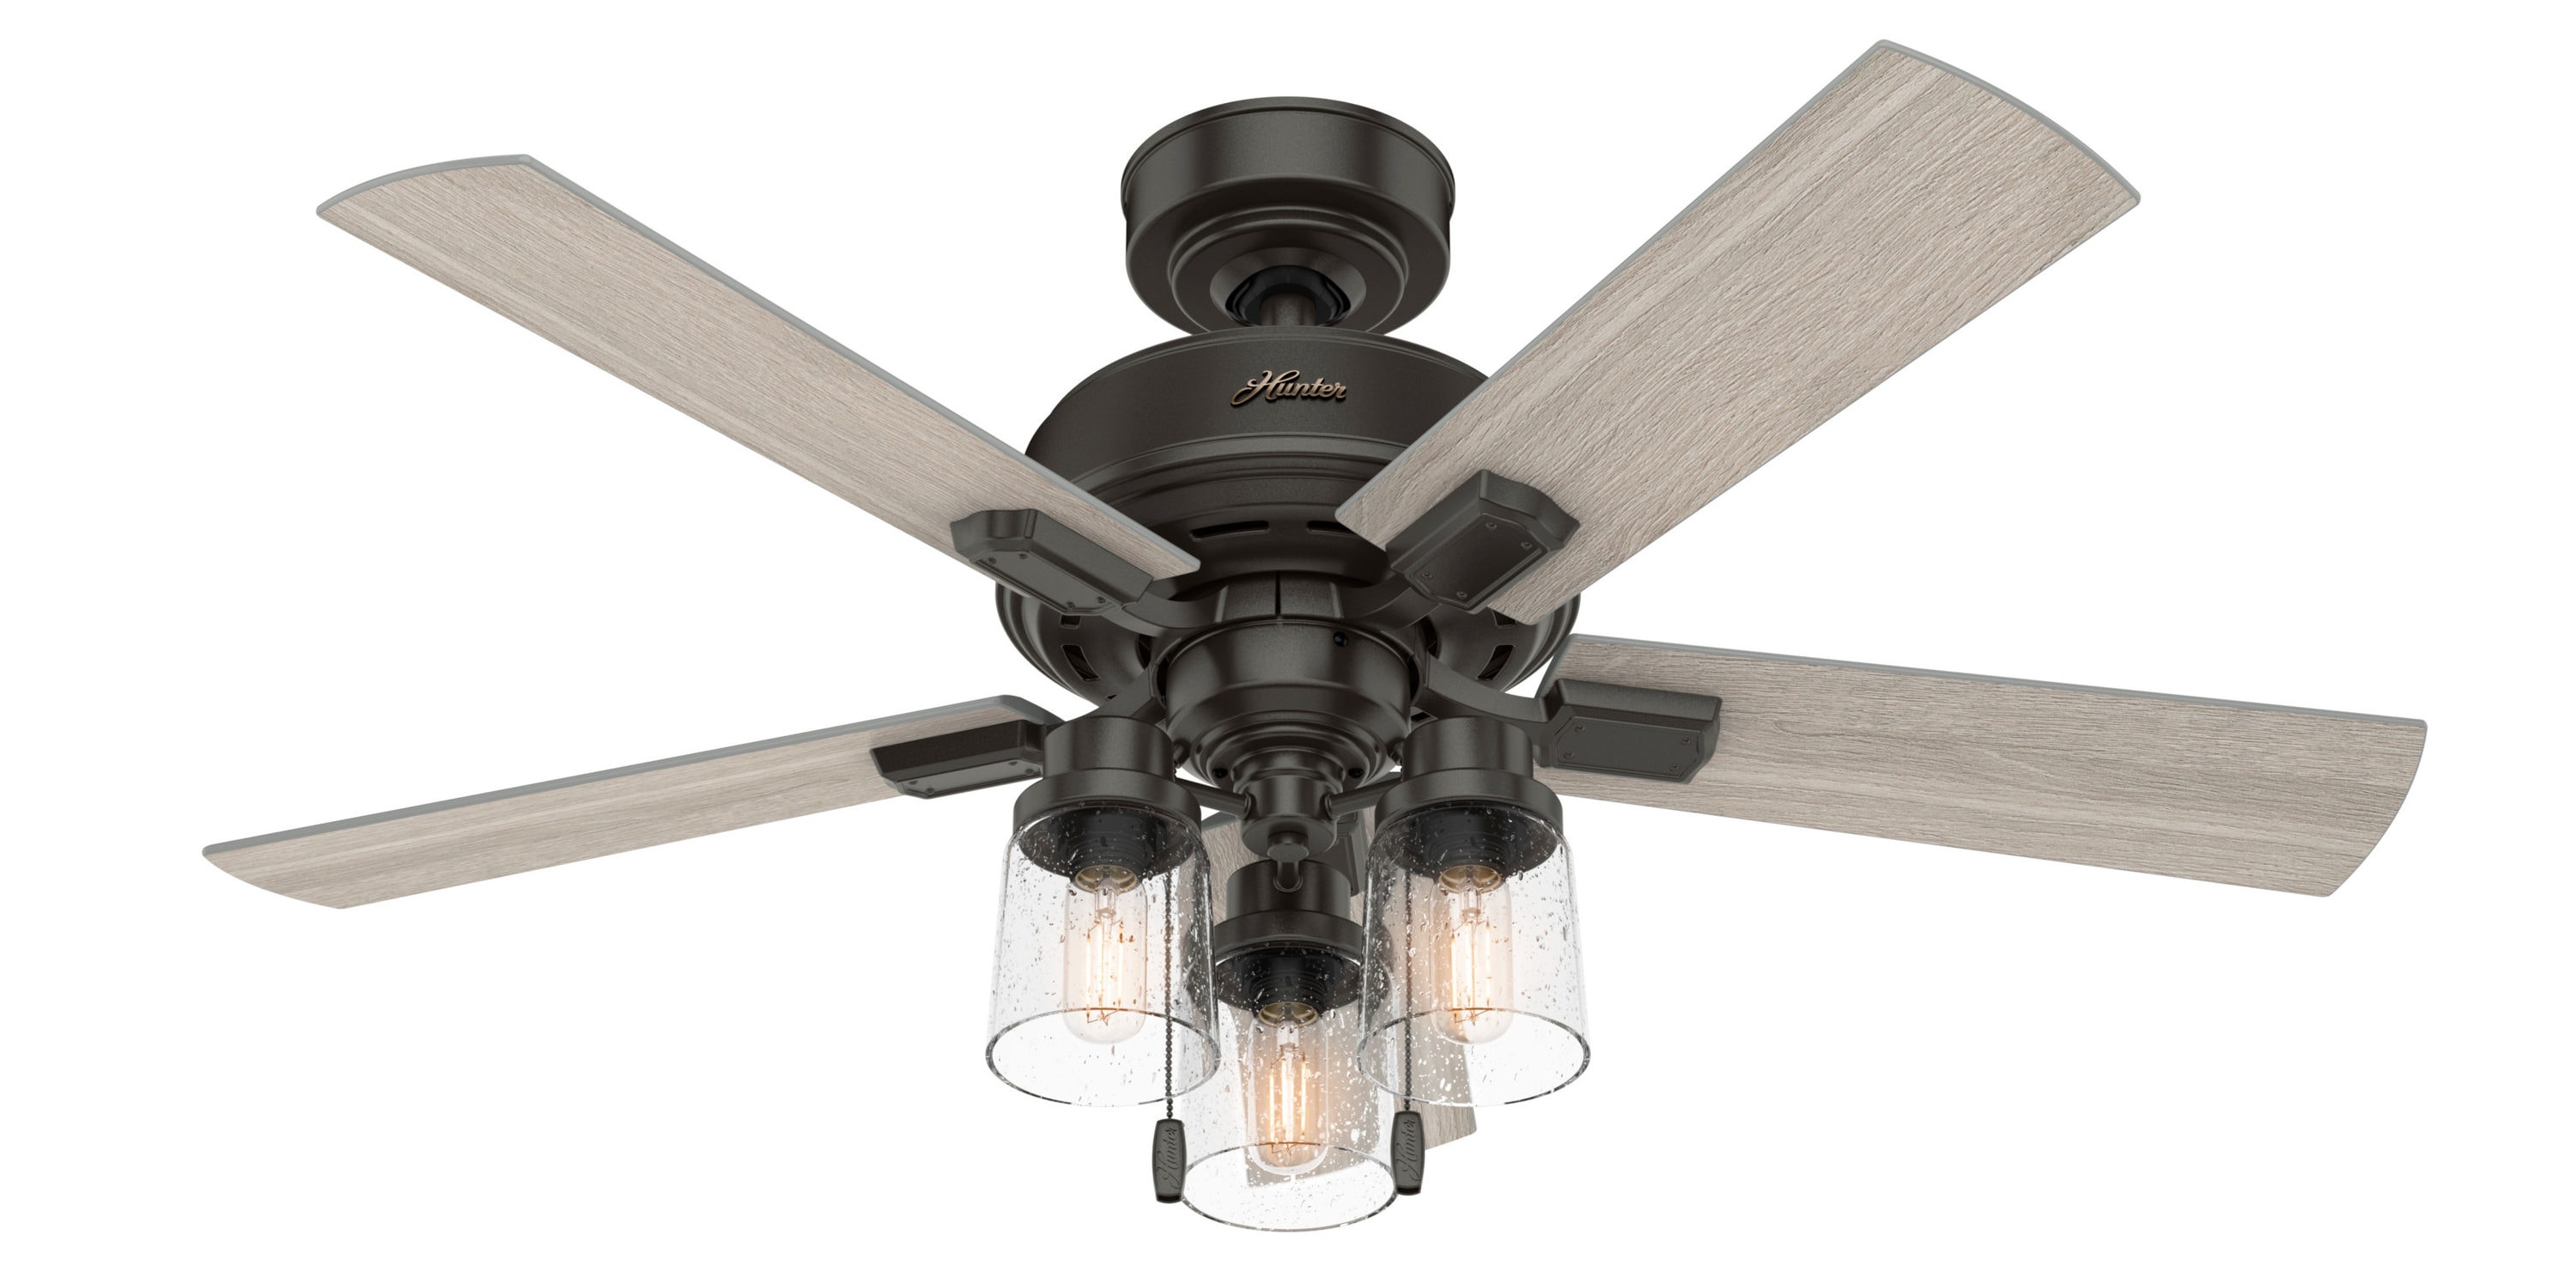 44" New Bronze LED Indoor Ceiling Fan with Light Kit 